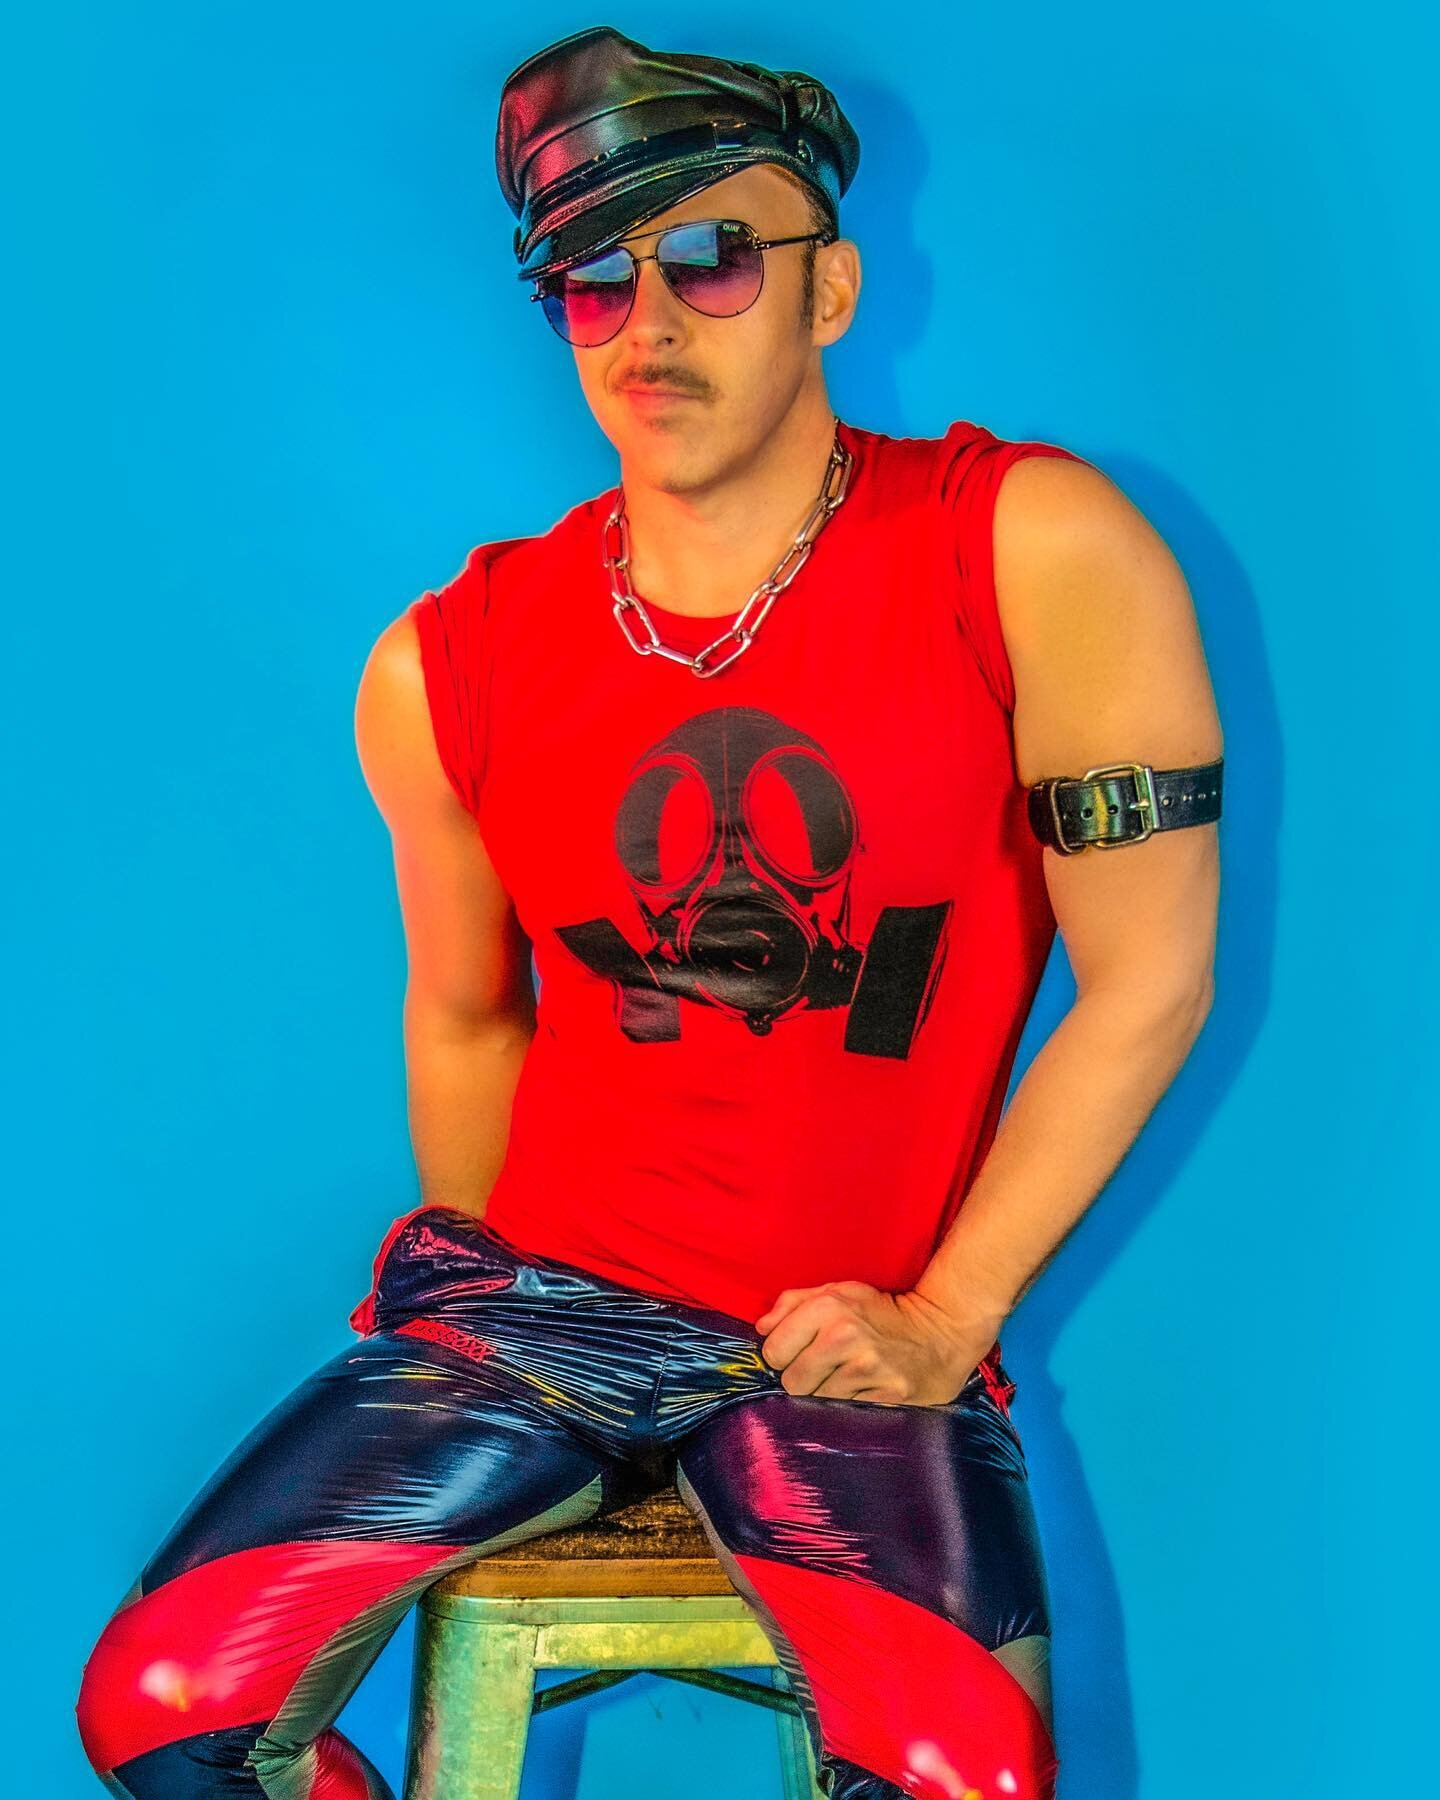 Got Mask? Here's our MASK MAN Tee. Red &amp; black &amp; weird &amp; fun! Perfect for heading out to the club &mdash; or church social!  Start the summer  off with a splash of kink!
Peachykings.com

#gaskmask 
#maskfetish #rubberdrone #folsomberlin